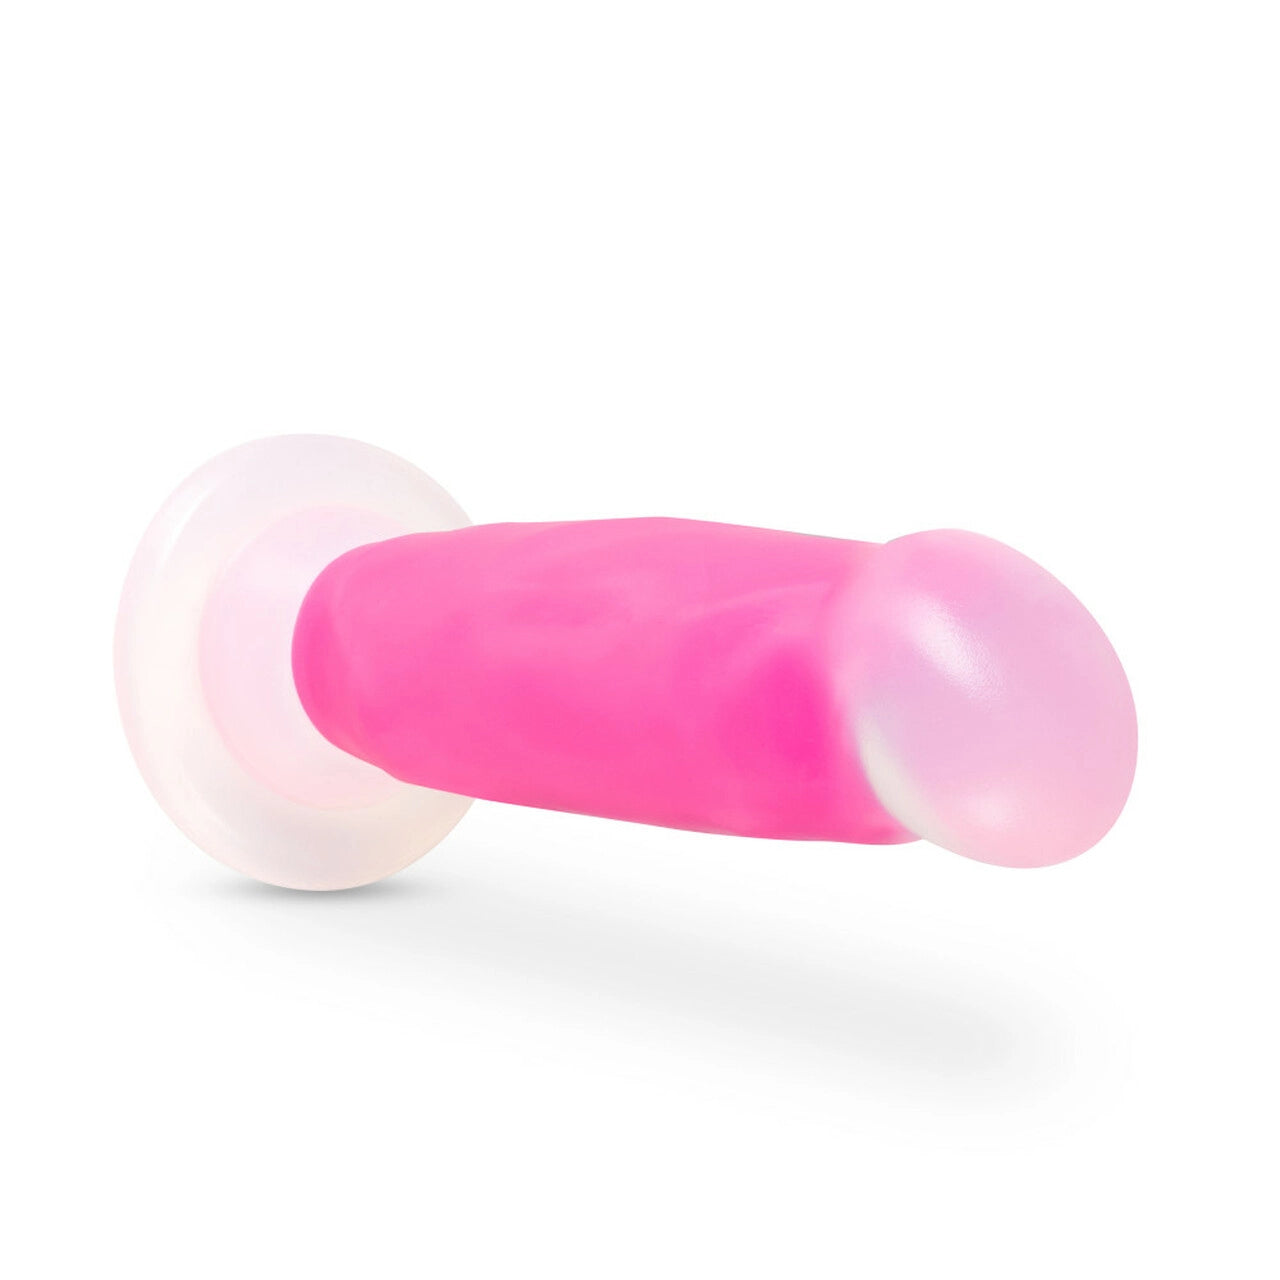 Neo Elite - Glow in the Dark - Marquee - 8 inch Silicone Dual Density Dildo - Neon Pink